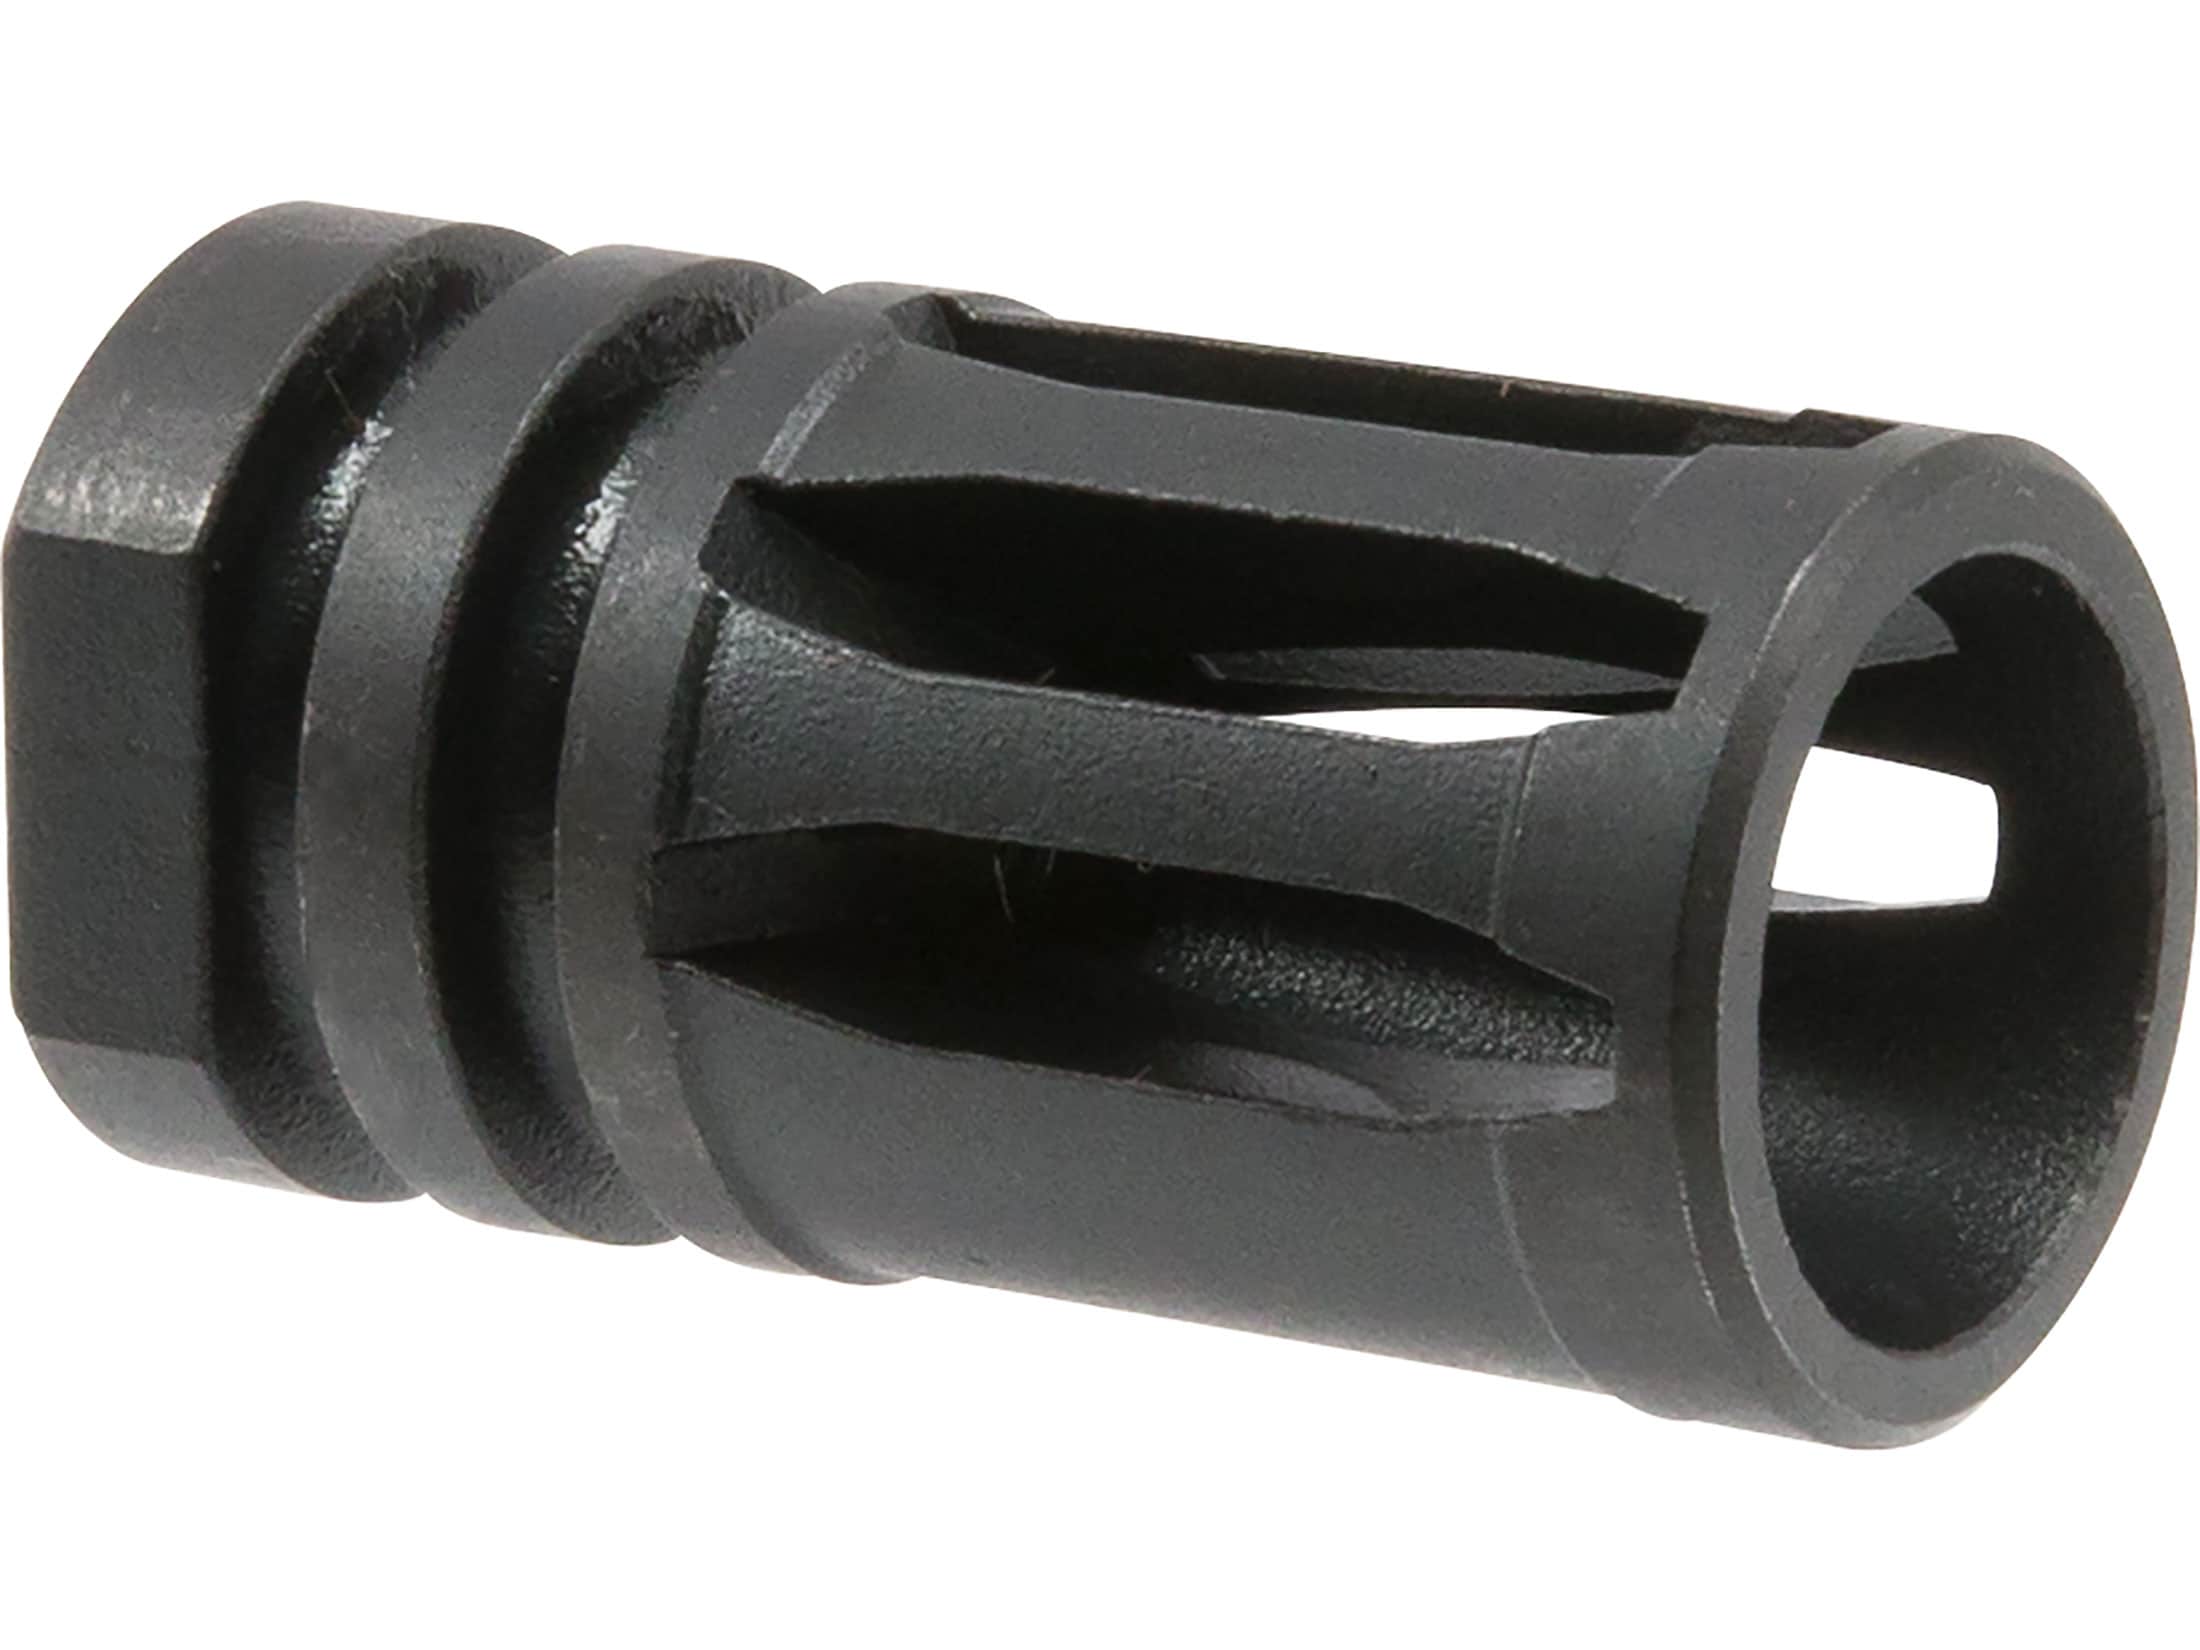 The AR-STONER A2 Flash Hider with 1/2&quot;-28 thread is an effecti...